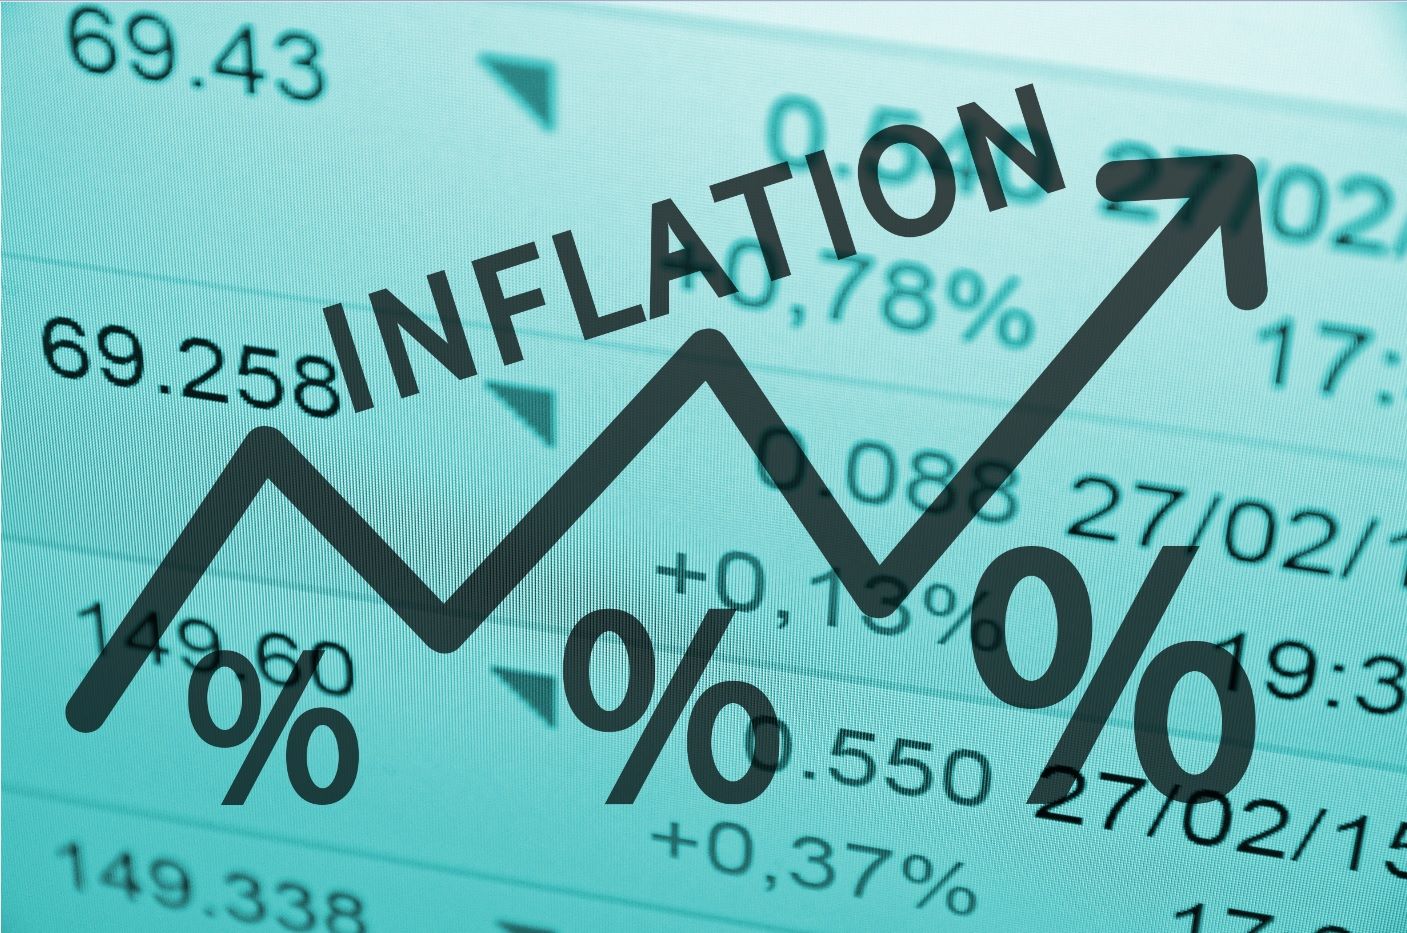 US inflation set to rise further